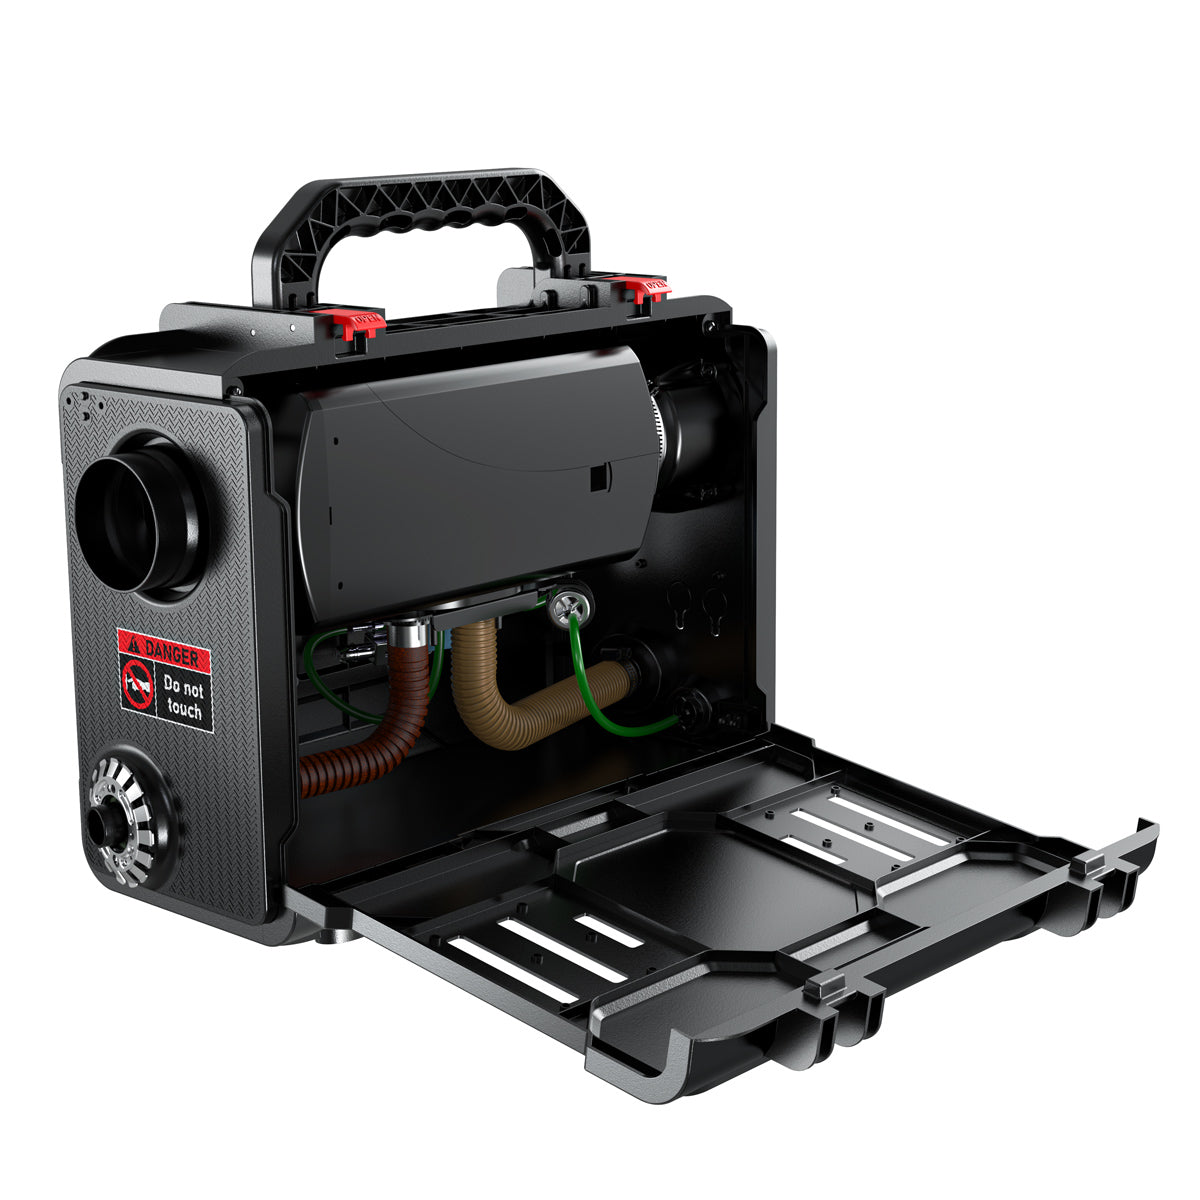 Hcalory-HC-A01-Diesel-Heater-5L-Handheld-Toolbox-All-In-One -back-side-view